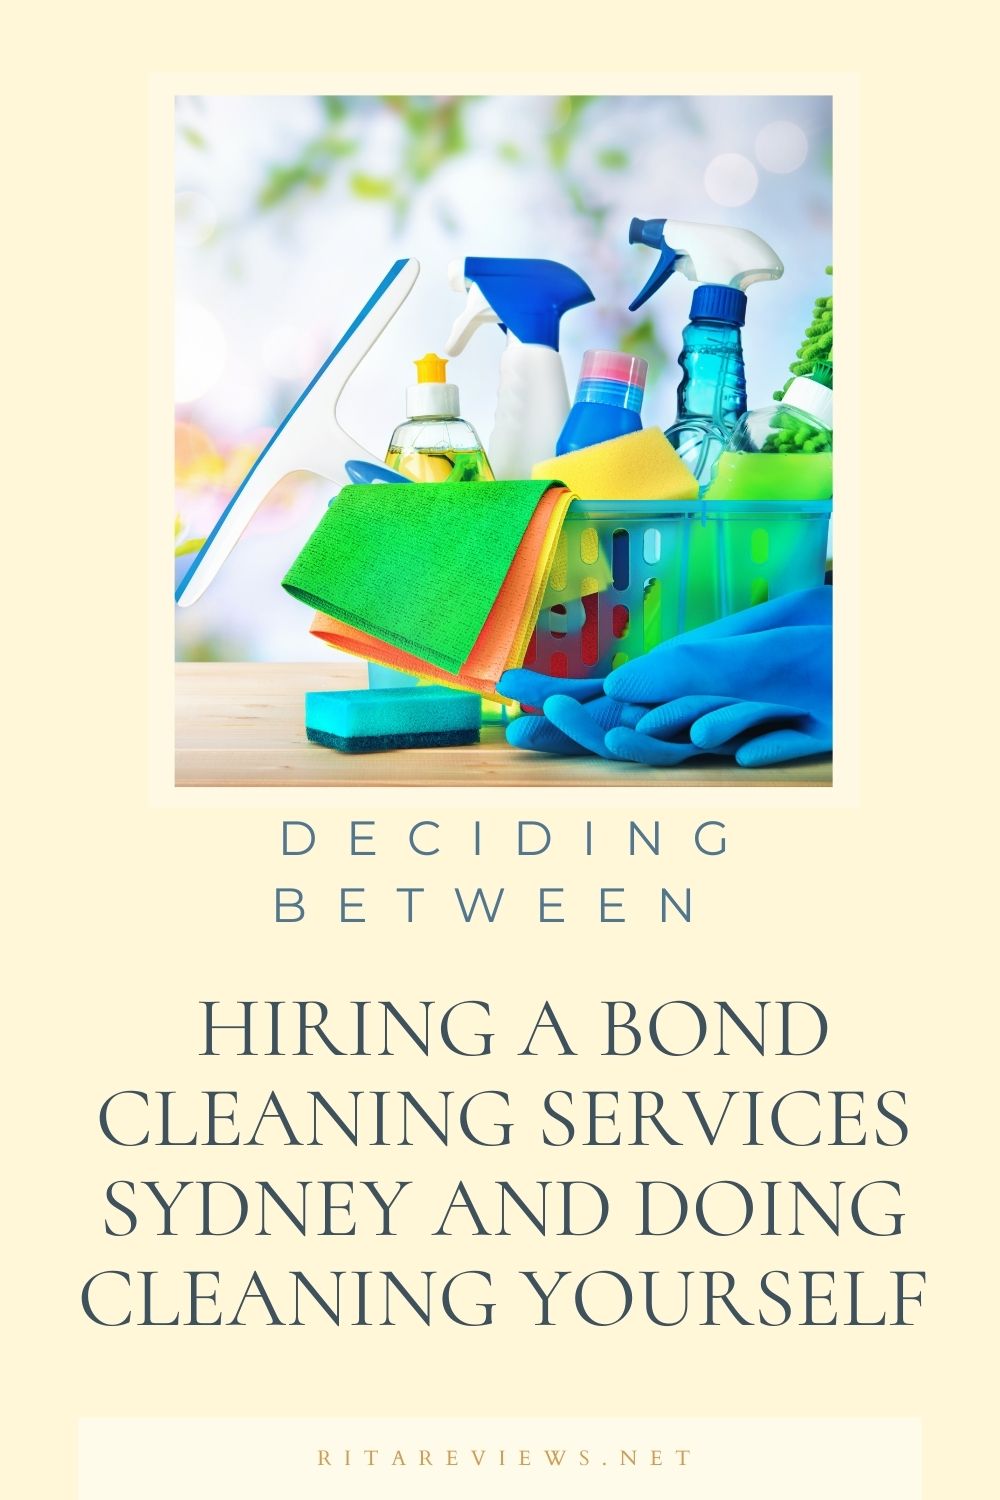 Deciding Between Hiring a Bond Cleaning Services Sydney and Doing Cleaning Yourself